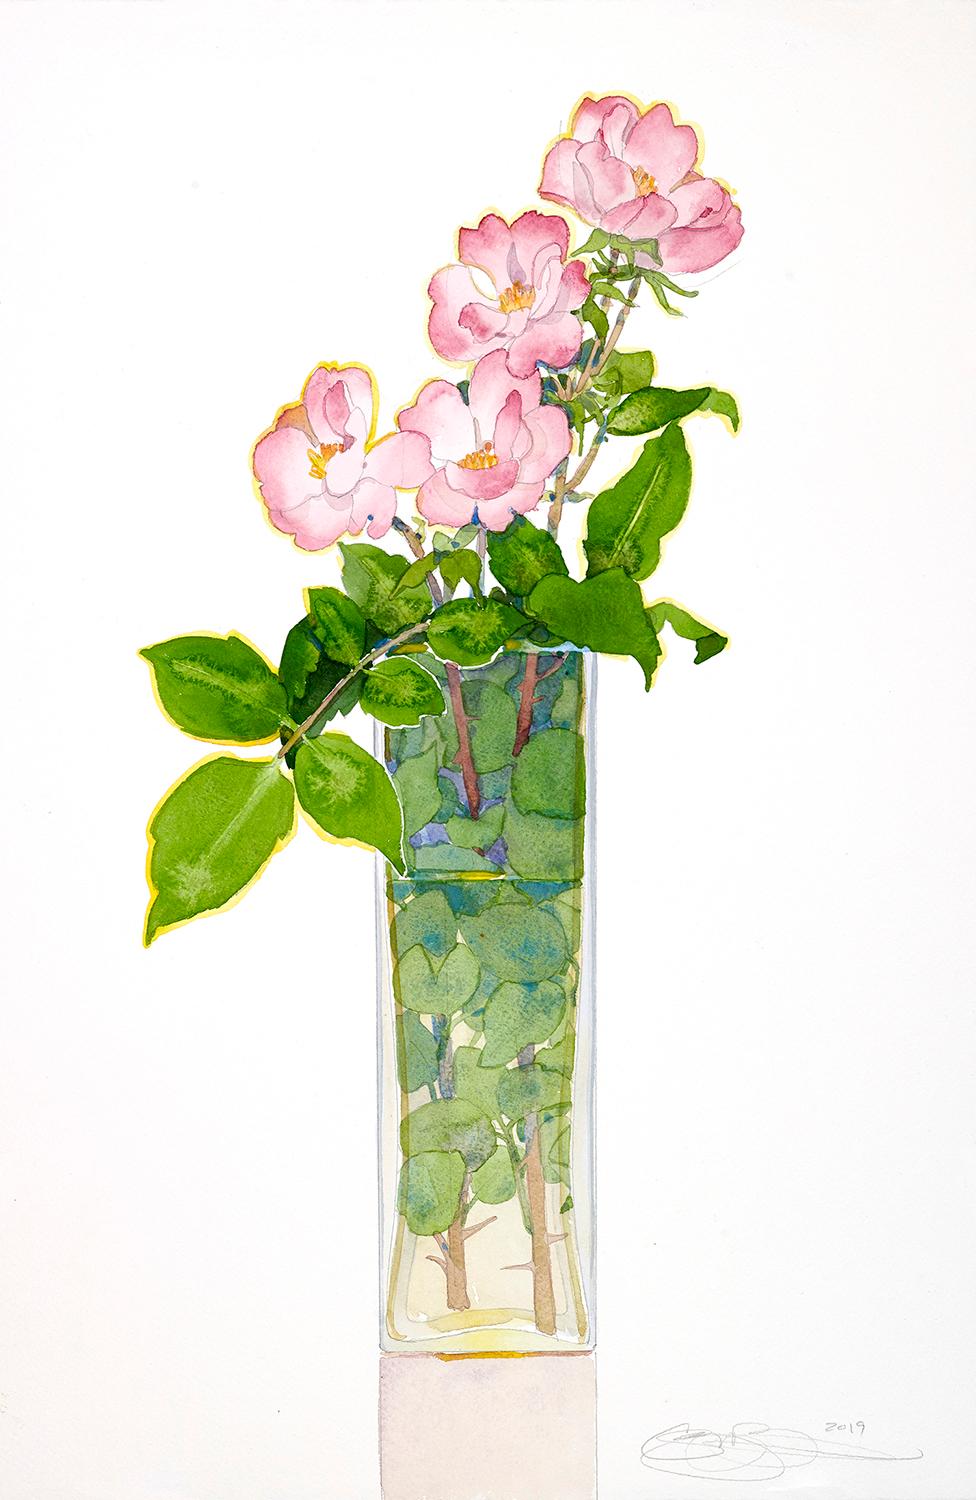 This watercolor by Gary Bukovnik features an arrangement of pink roses in a clear vase.  The leaves are in a rich green with touches of blue in the vase. The work is framed under acrylic in a hand-made white lacquered frame. 

Gary Bukovnik